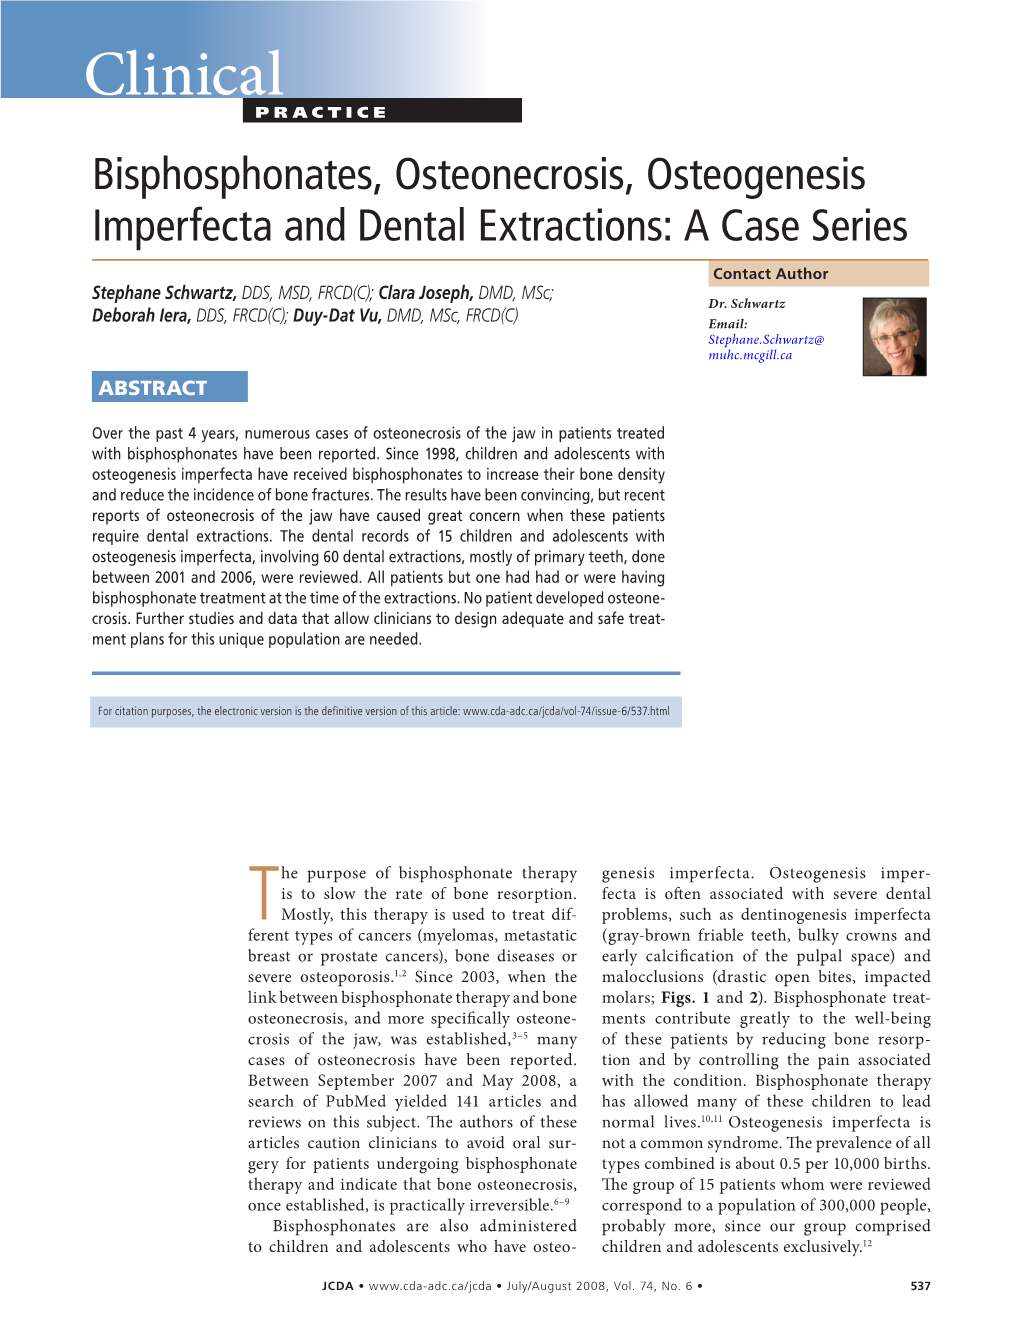 Bisphosphonates, Osteonecrosis, Osteogenesis Imperfecta and Dental Extractions: a Case Series